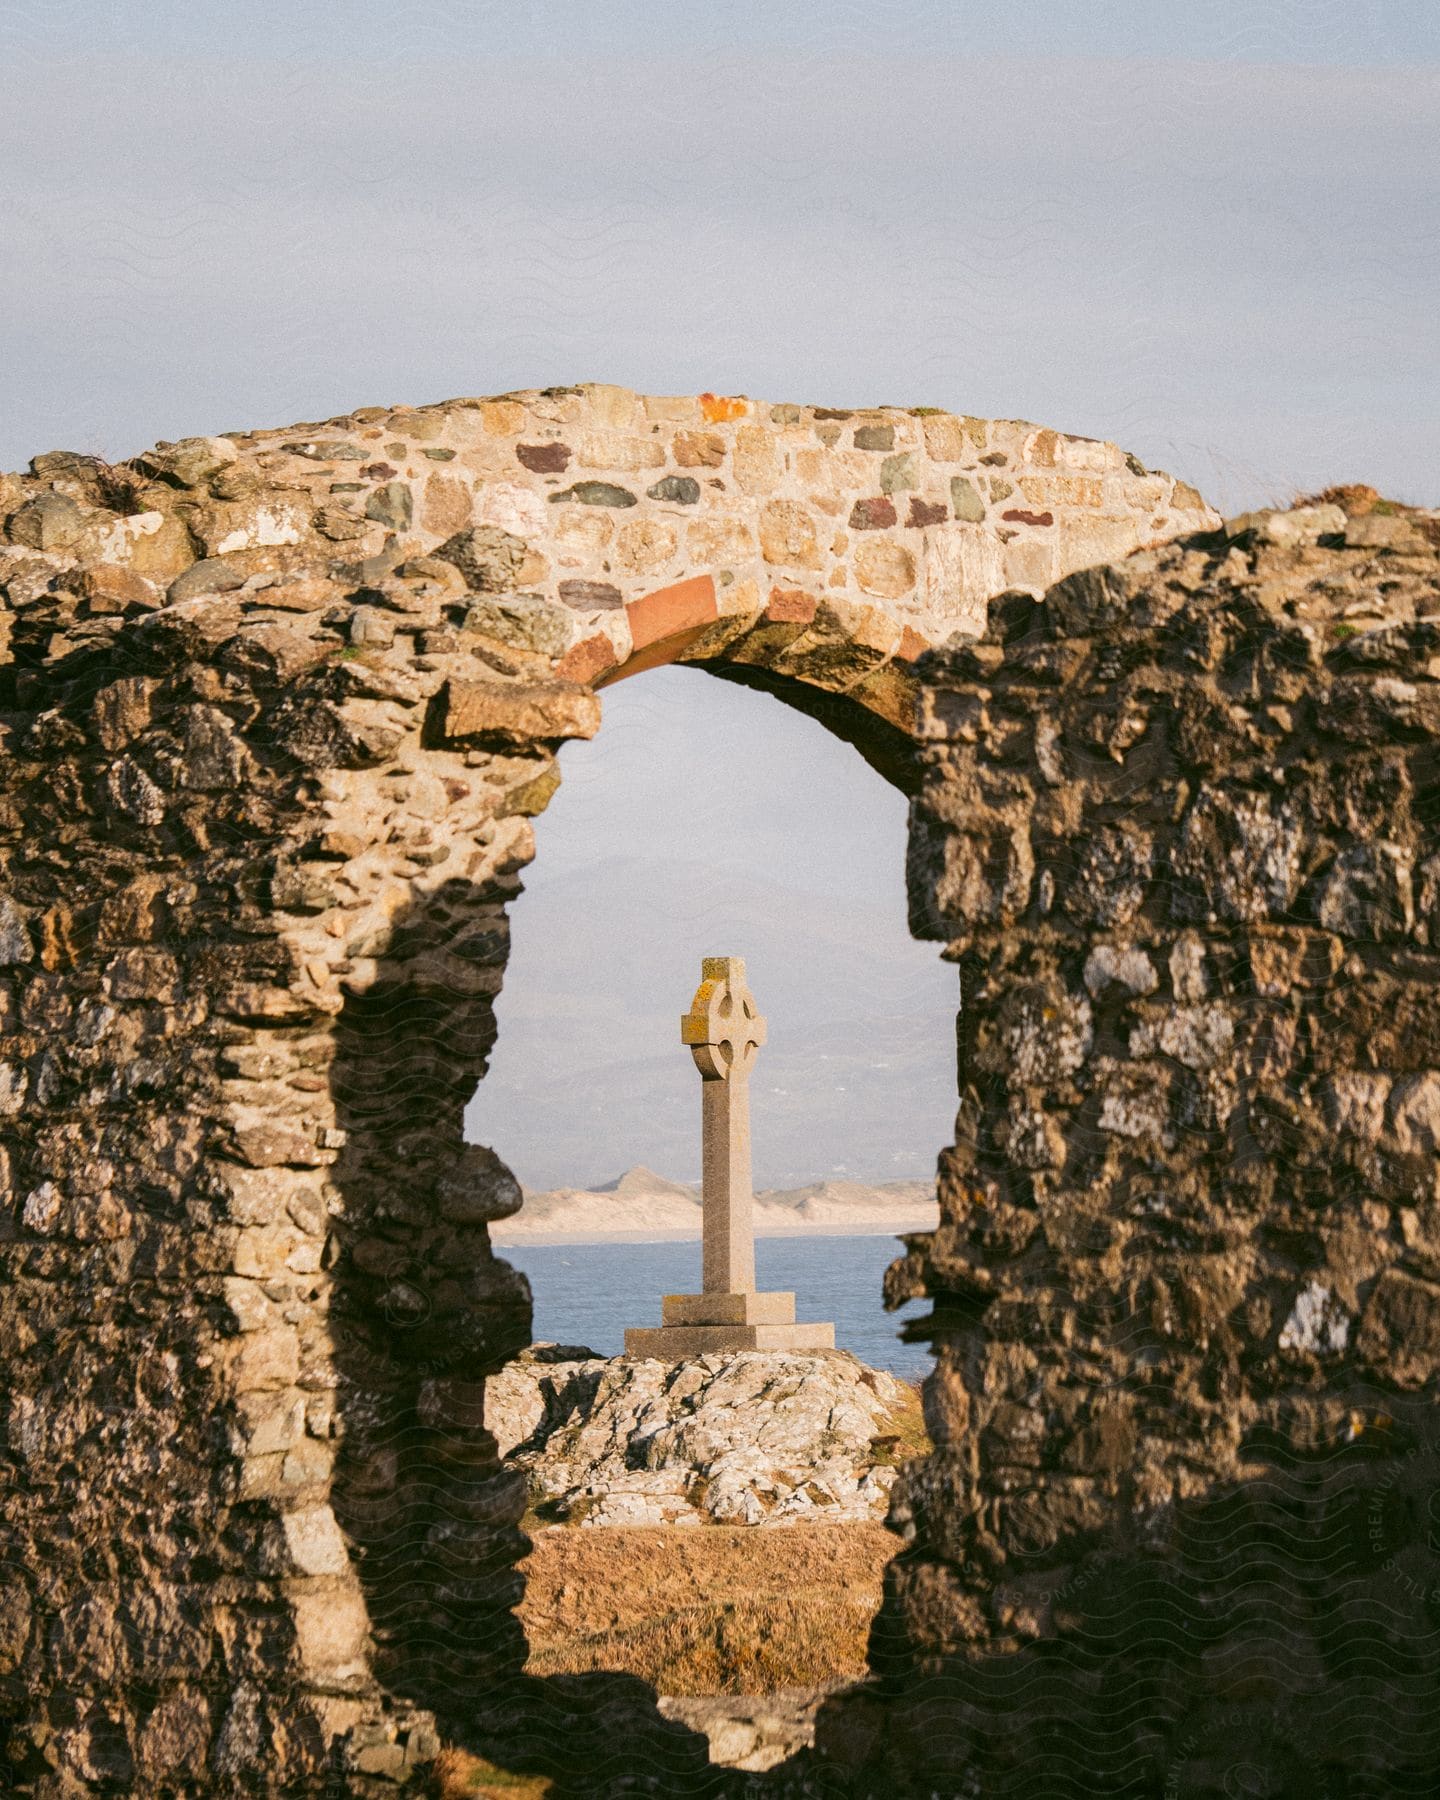 Stone cross seen through an opening in a stone wall with the sea in the background on the island of Ynys Llanddwyn